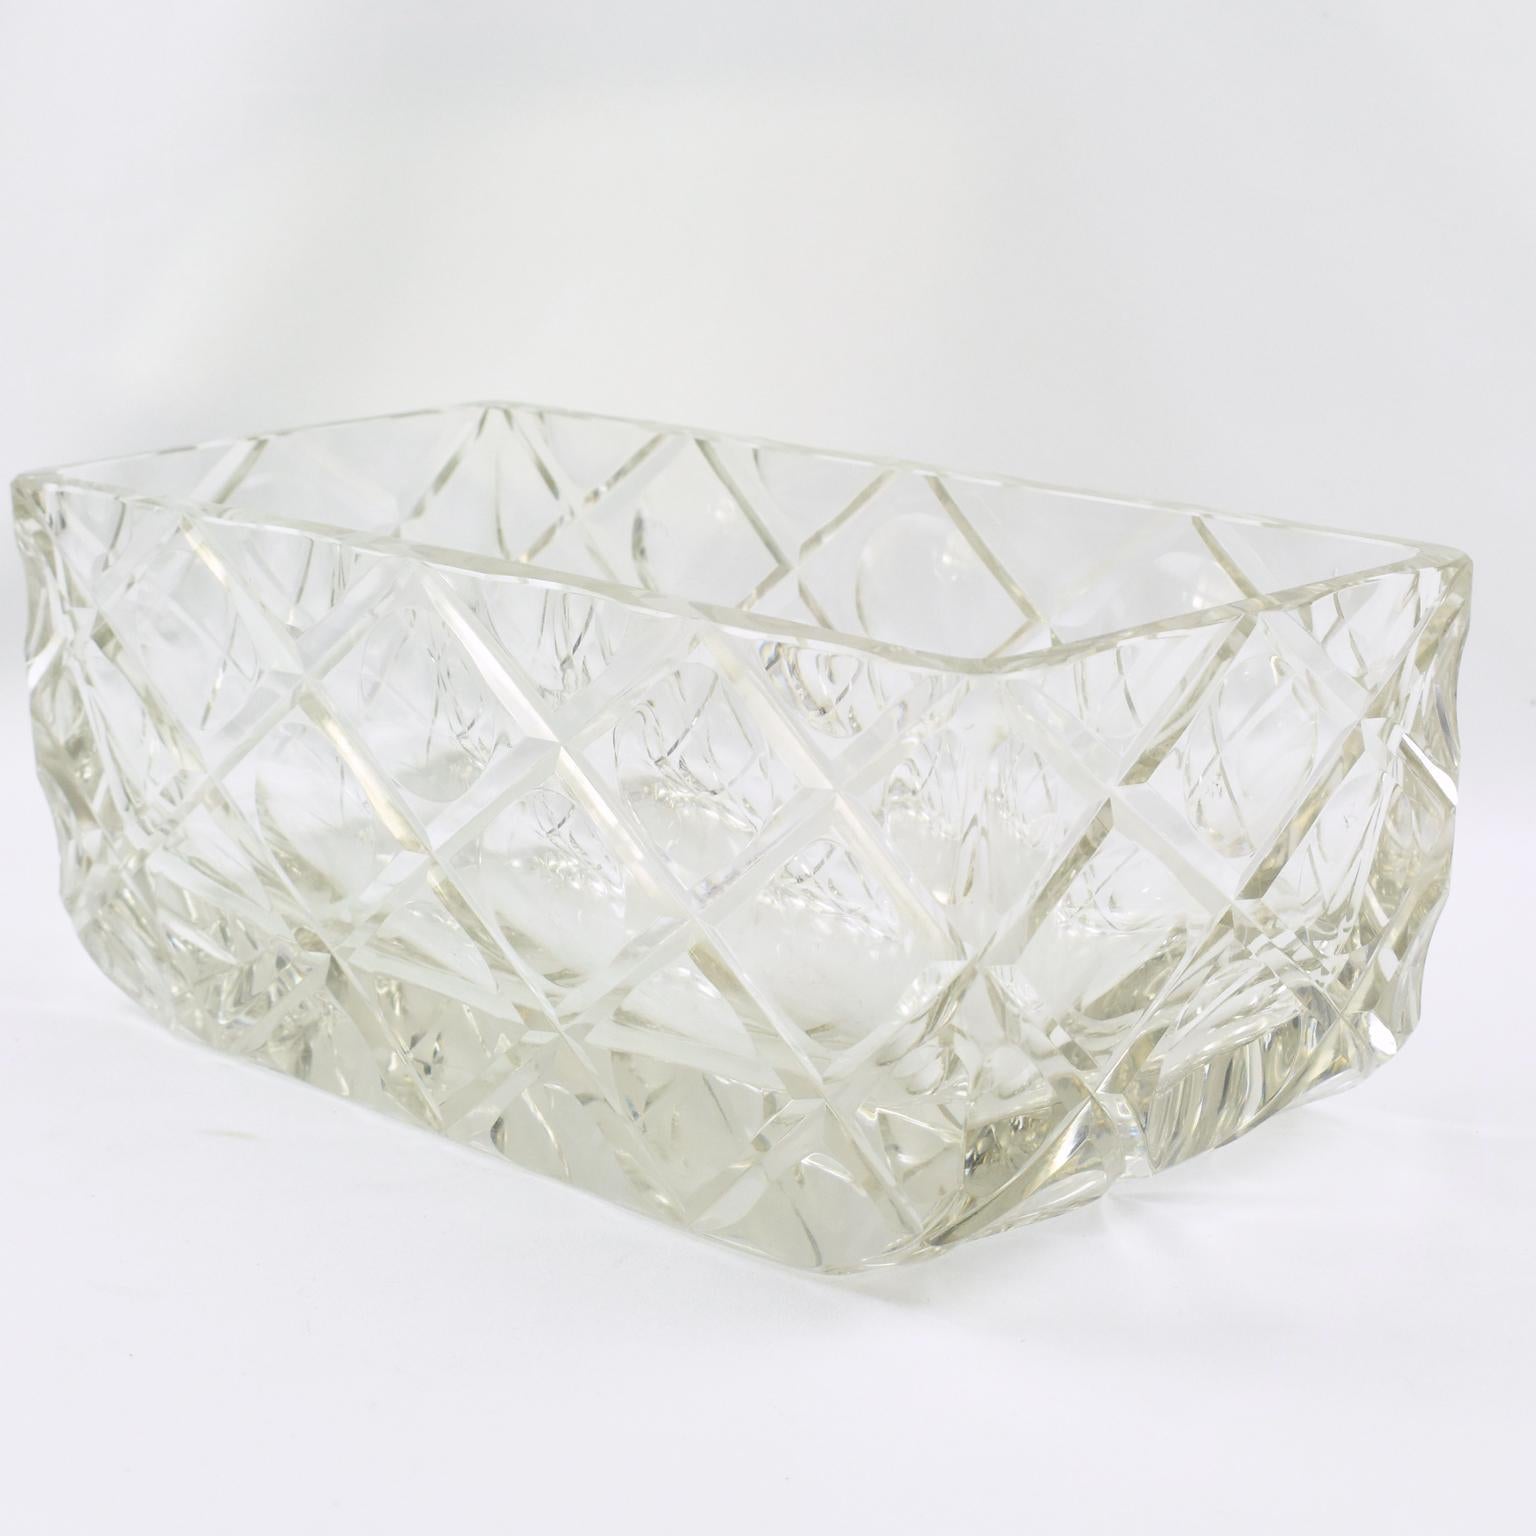 This impressive sculptural Art Deco crystal centerpiece, or decorative bowl, was hand-crafted in France in the 1930s. The modernist streamlined rectangular shape boasts a deep geometric etching. This piece is heavy and sturdy with a high-end